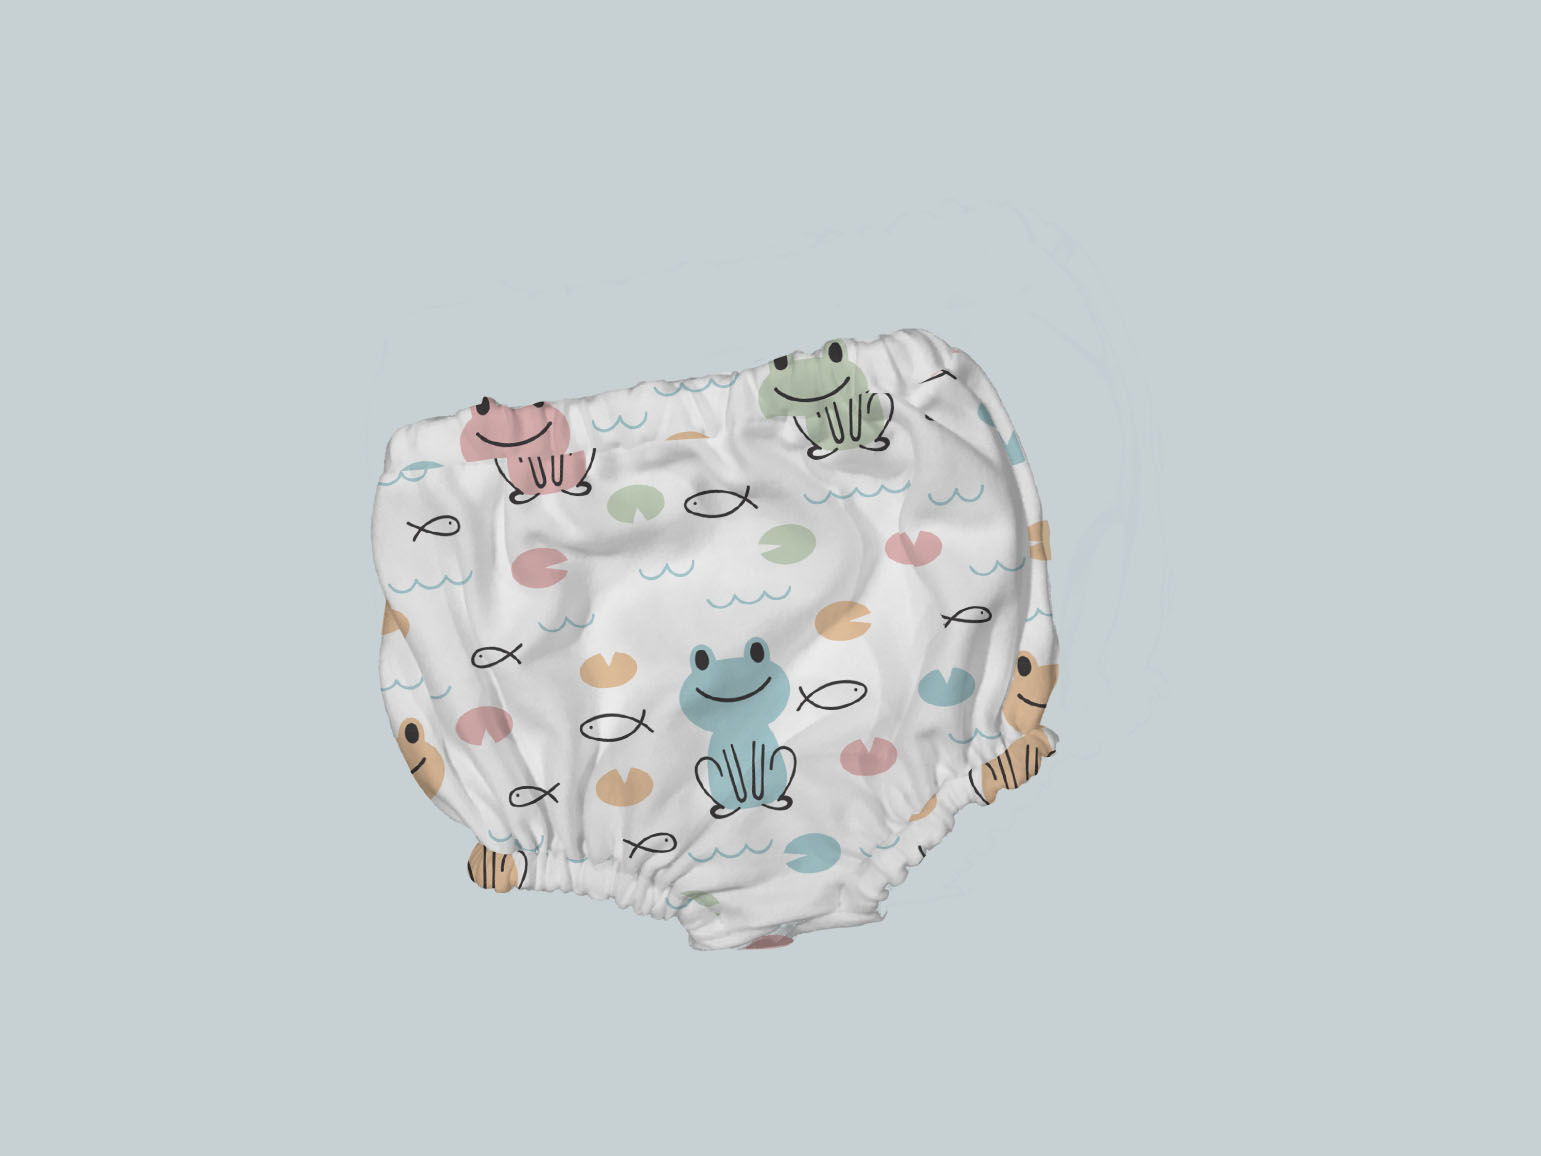 Bummies/Diaper Cover - Leap Frog